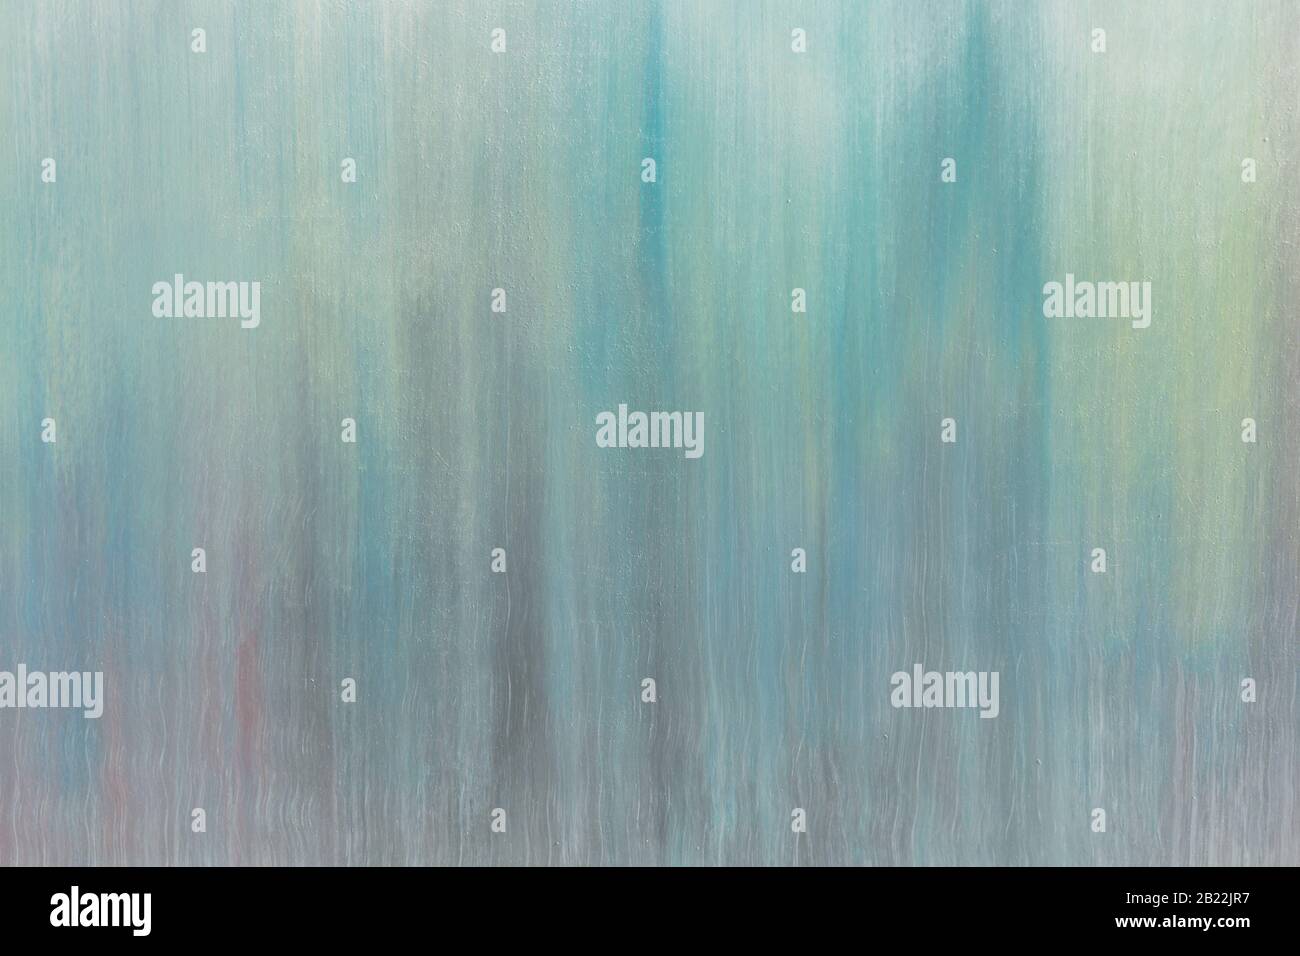 Painted abstract colorful creative background Stock Photo